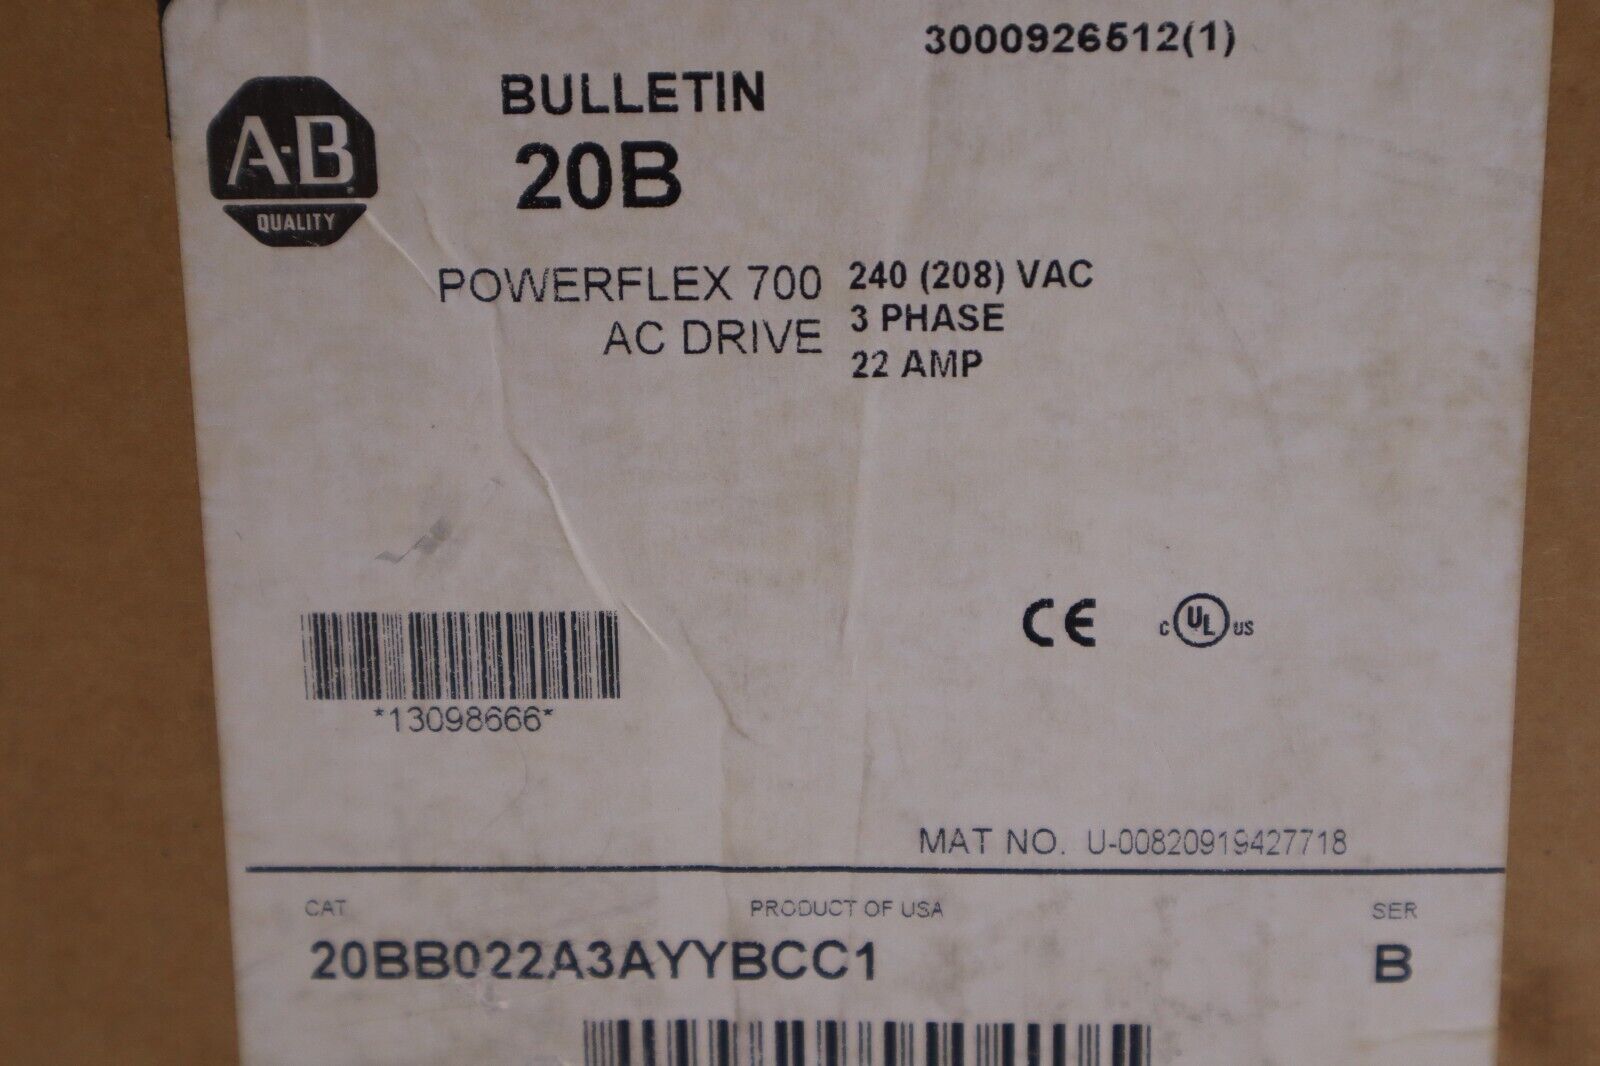 NEW Allen Bradley 20BB022A3AYYBCC1 AC VFD Variable Frequency Drive STOCK 4708